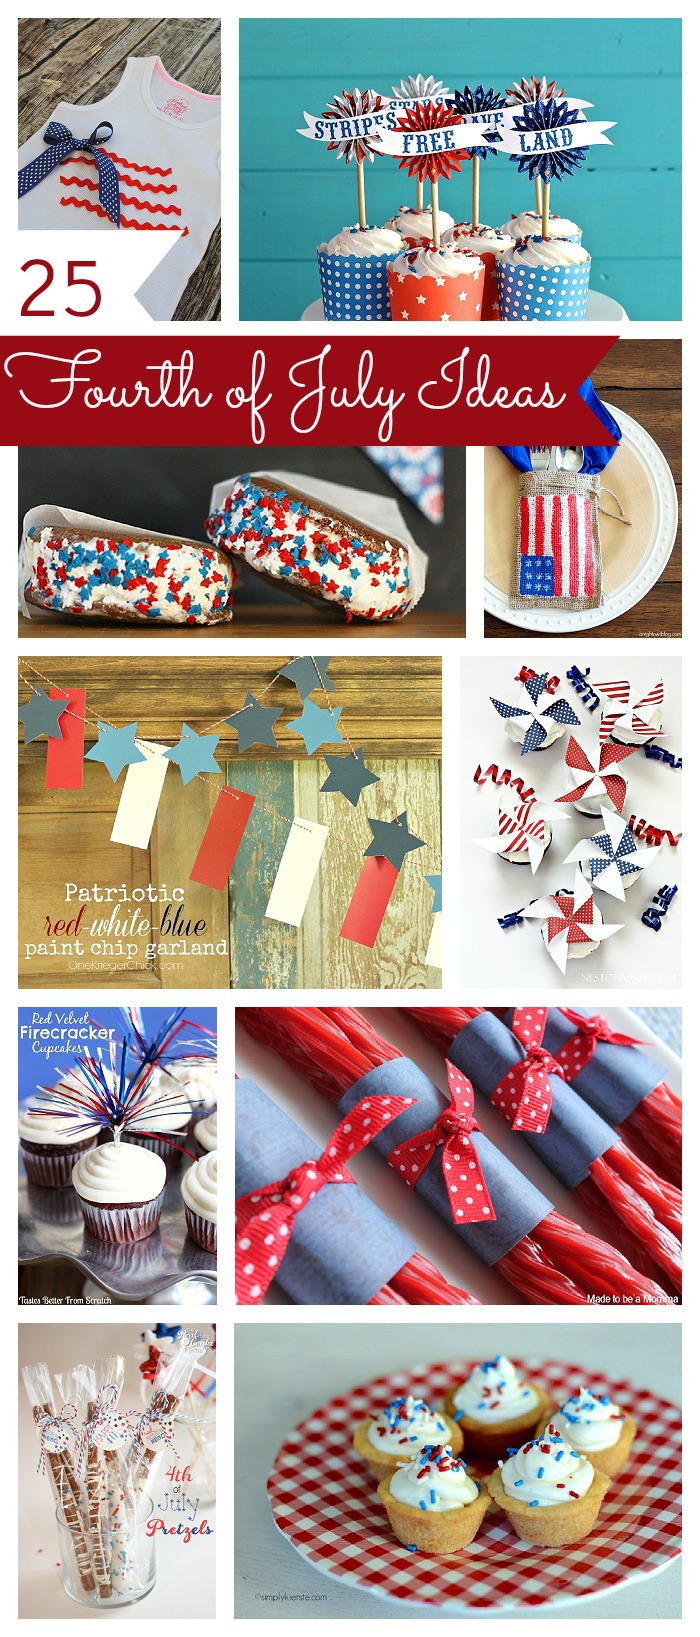 25 Fourth of July Ideas: snacks, decor and more!  